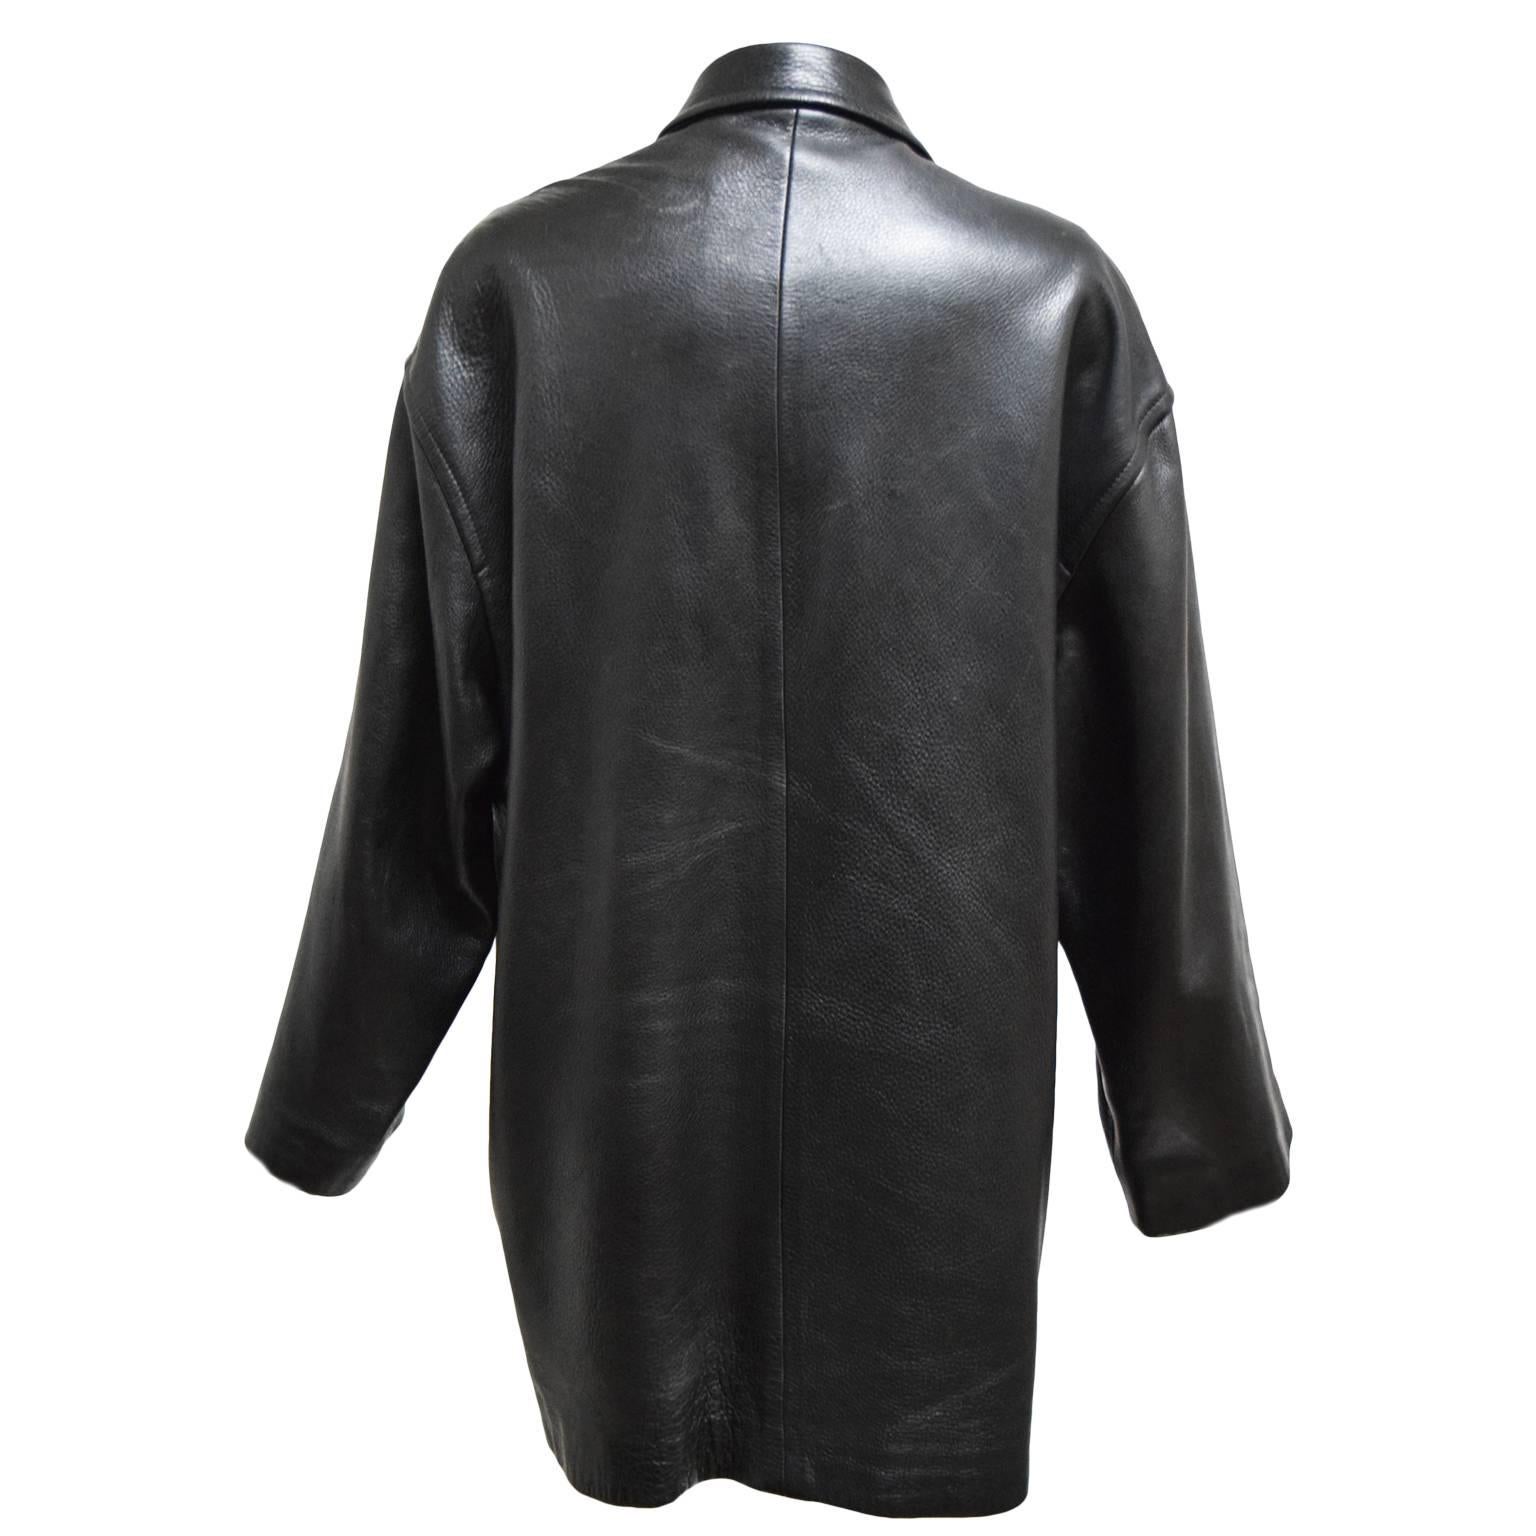 This beautiful vintage leather jacket by Donna Karan is made from 100% black leather and is lined in rich silk. There are button closures, two side pockets and a collar. It is a size petite however it can fit up to a size 10. 